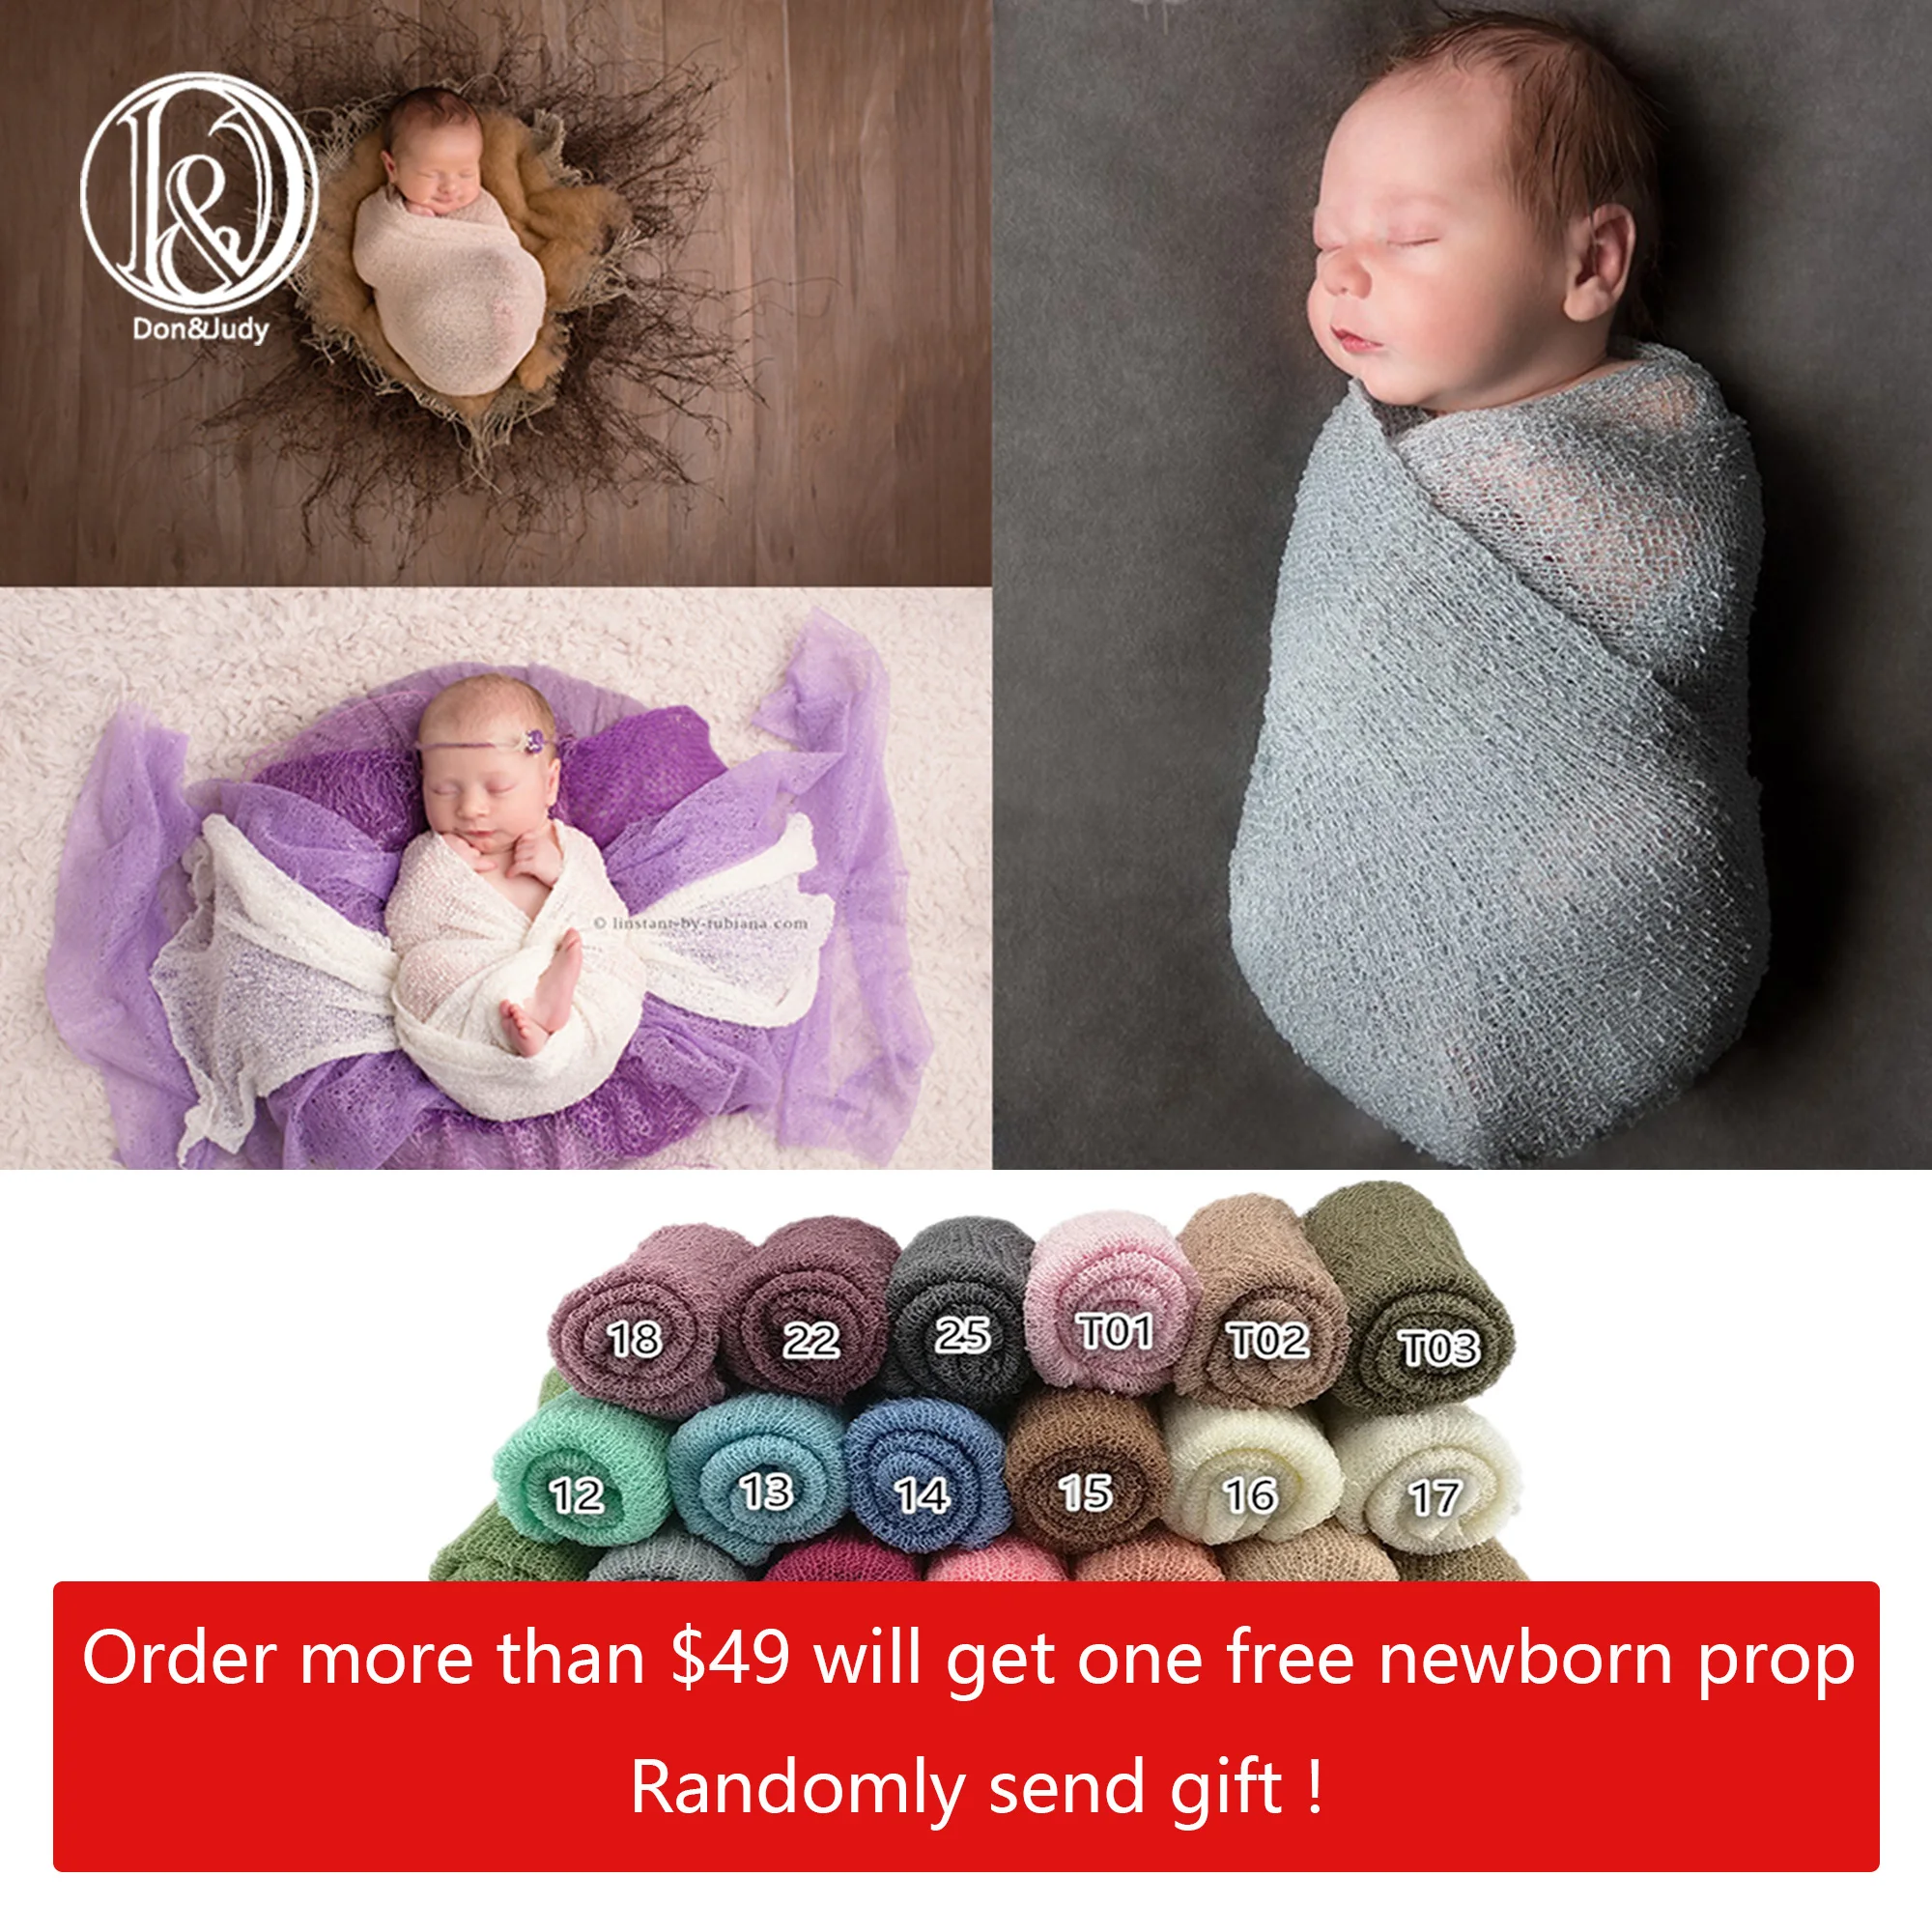 2pcs lot stretchy soft cotton newborn infant wraps 45x160cm photography accessories baby photo shooting props basket layer Soft Knit Stretchy Wraps Swaddle For Newborn Baby Photography Props Kids Receiving Blankets Cloth Accessories For Photo Shooting